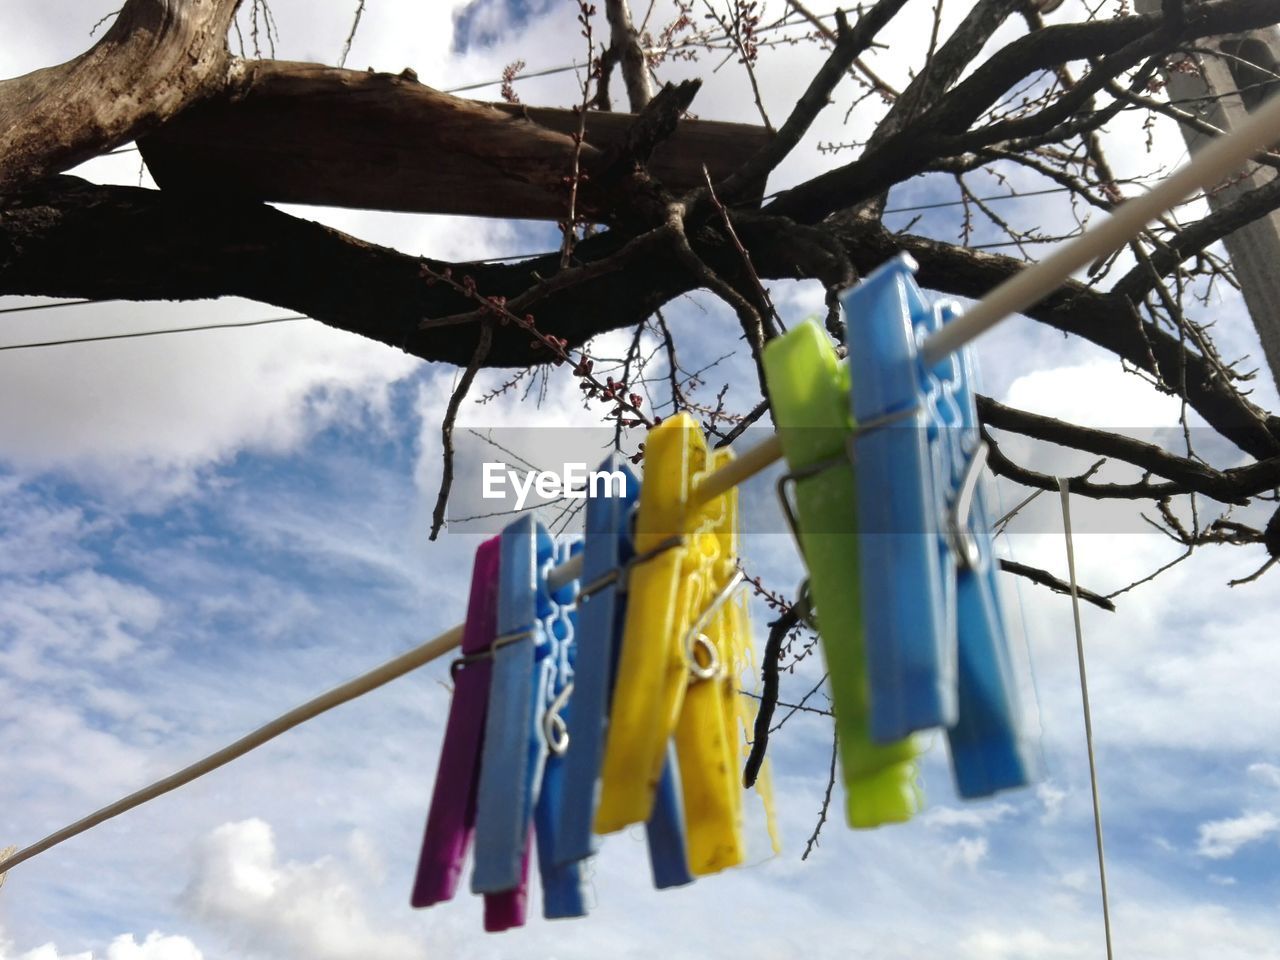 LOW ANGLE VIEW OF CLOTHESPINS HANGING ON TREE